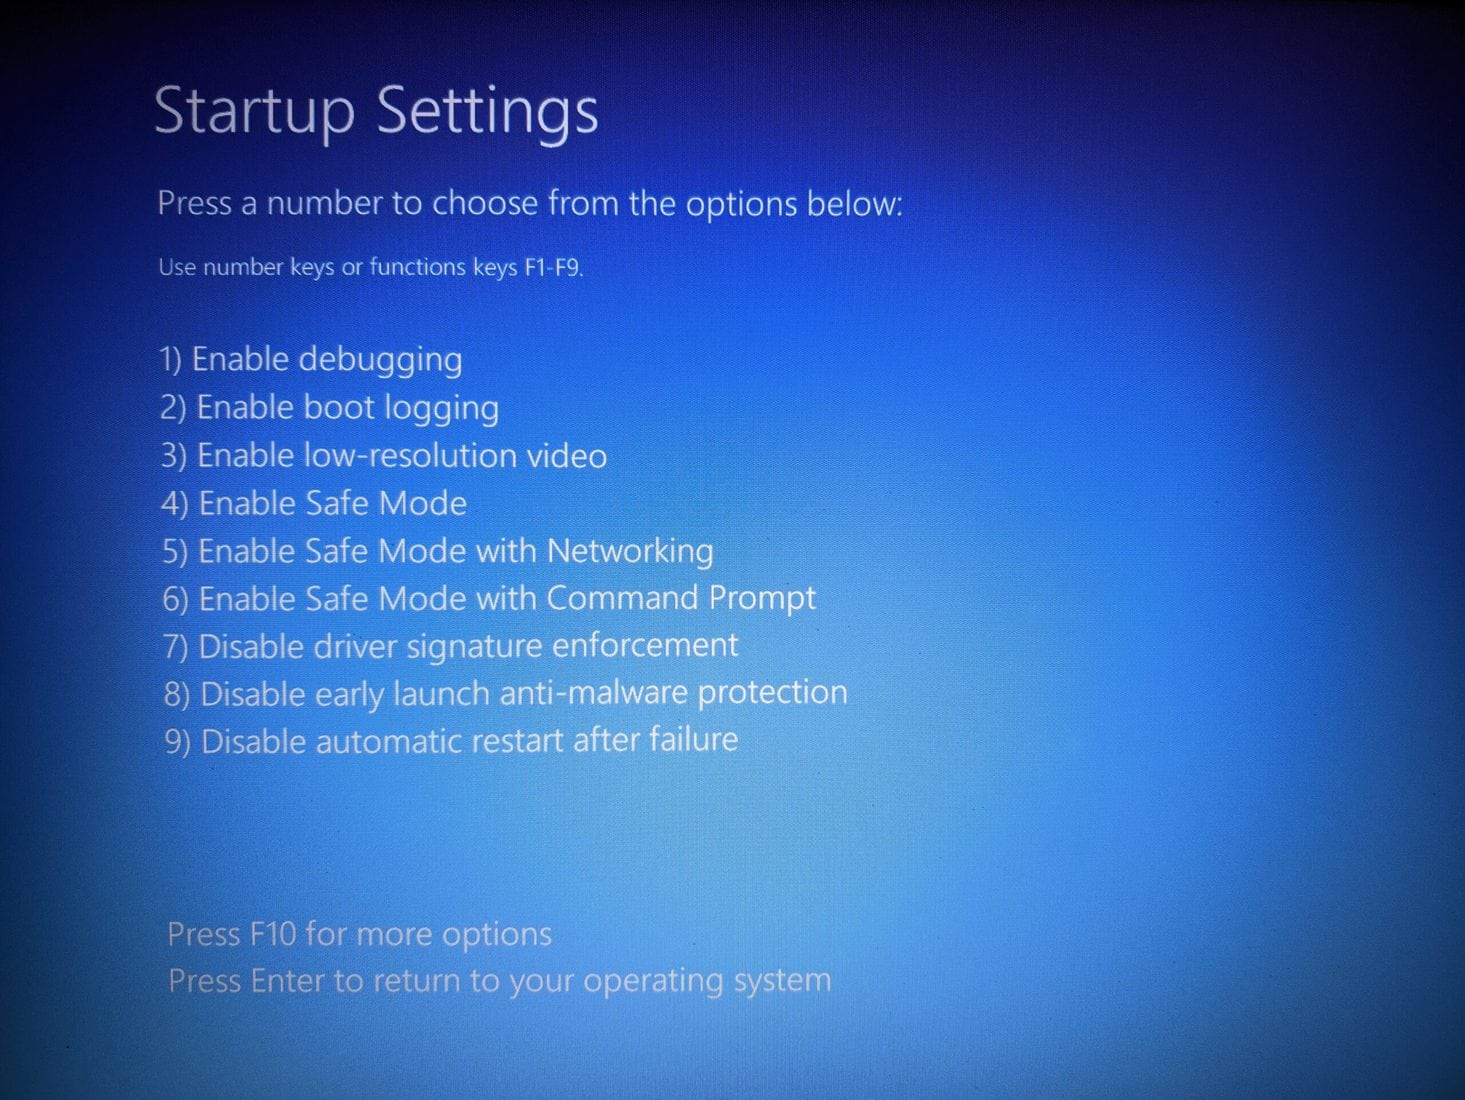 Press 4 or F4 in Startup Settings option to boot into Safe Mode